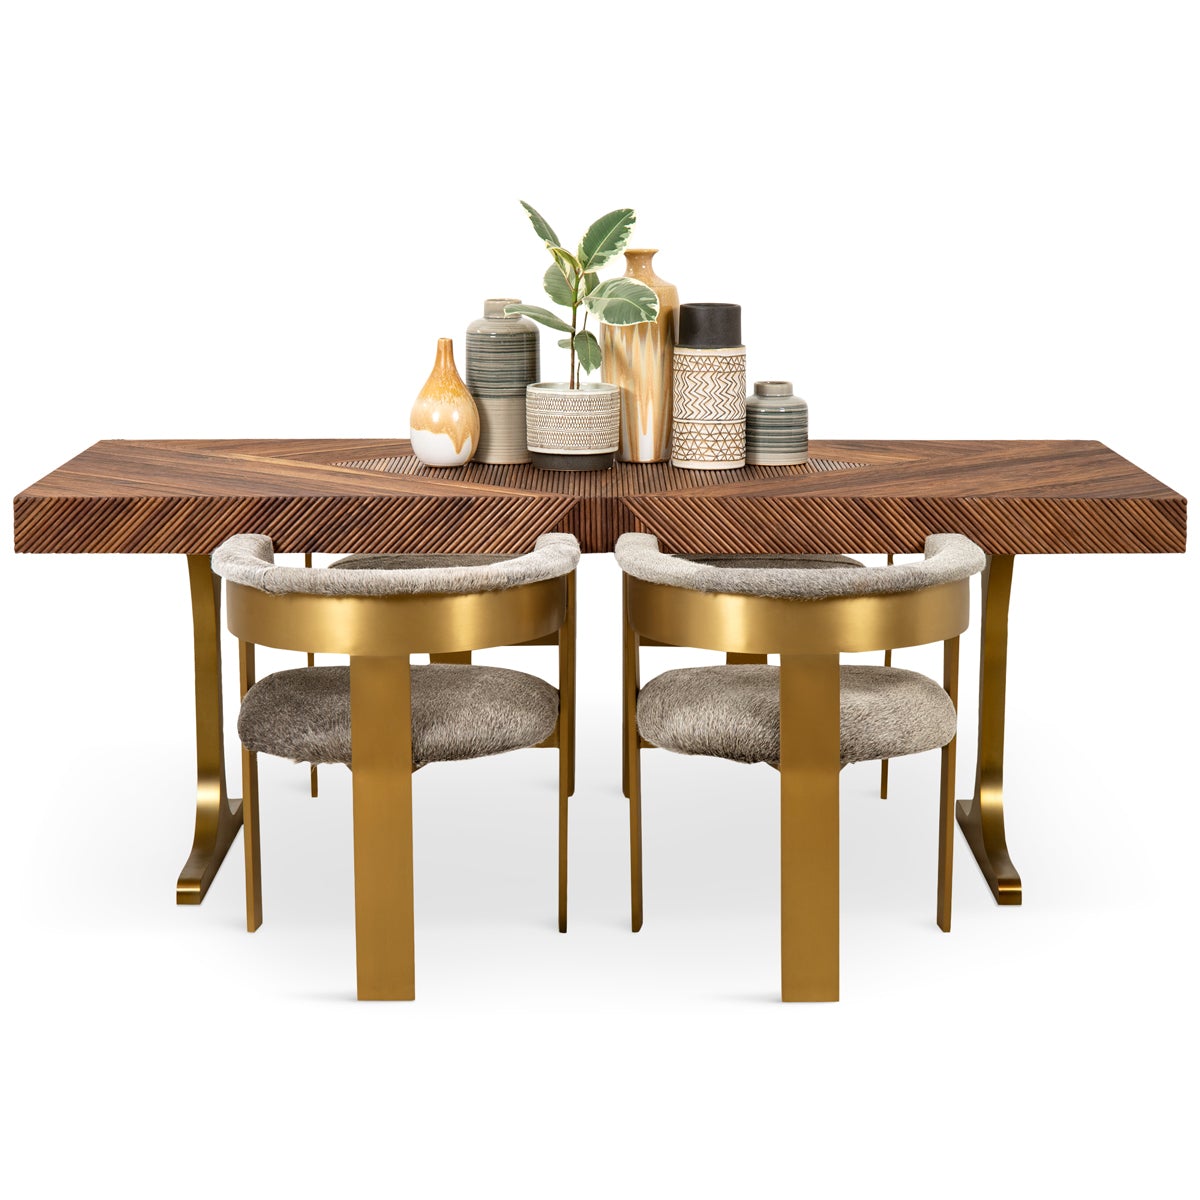 Milan Dining Table in Oiled Walnut - ModShop1.com